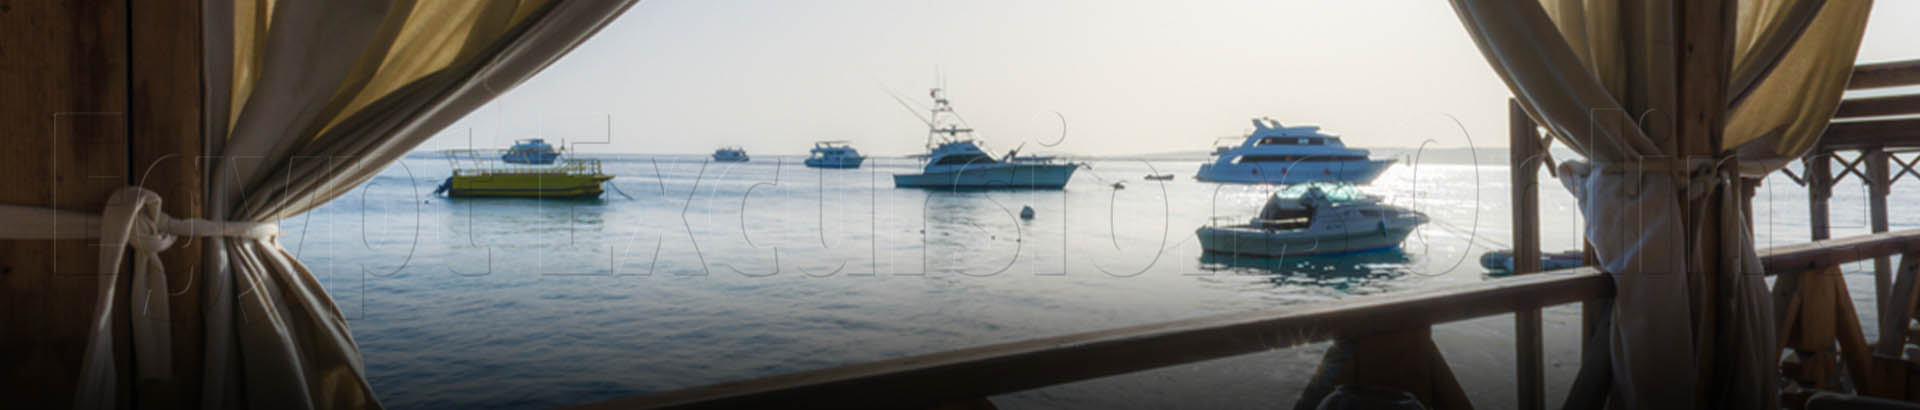 Hurghada Excursions and Day Tours